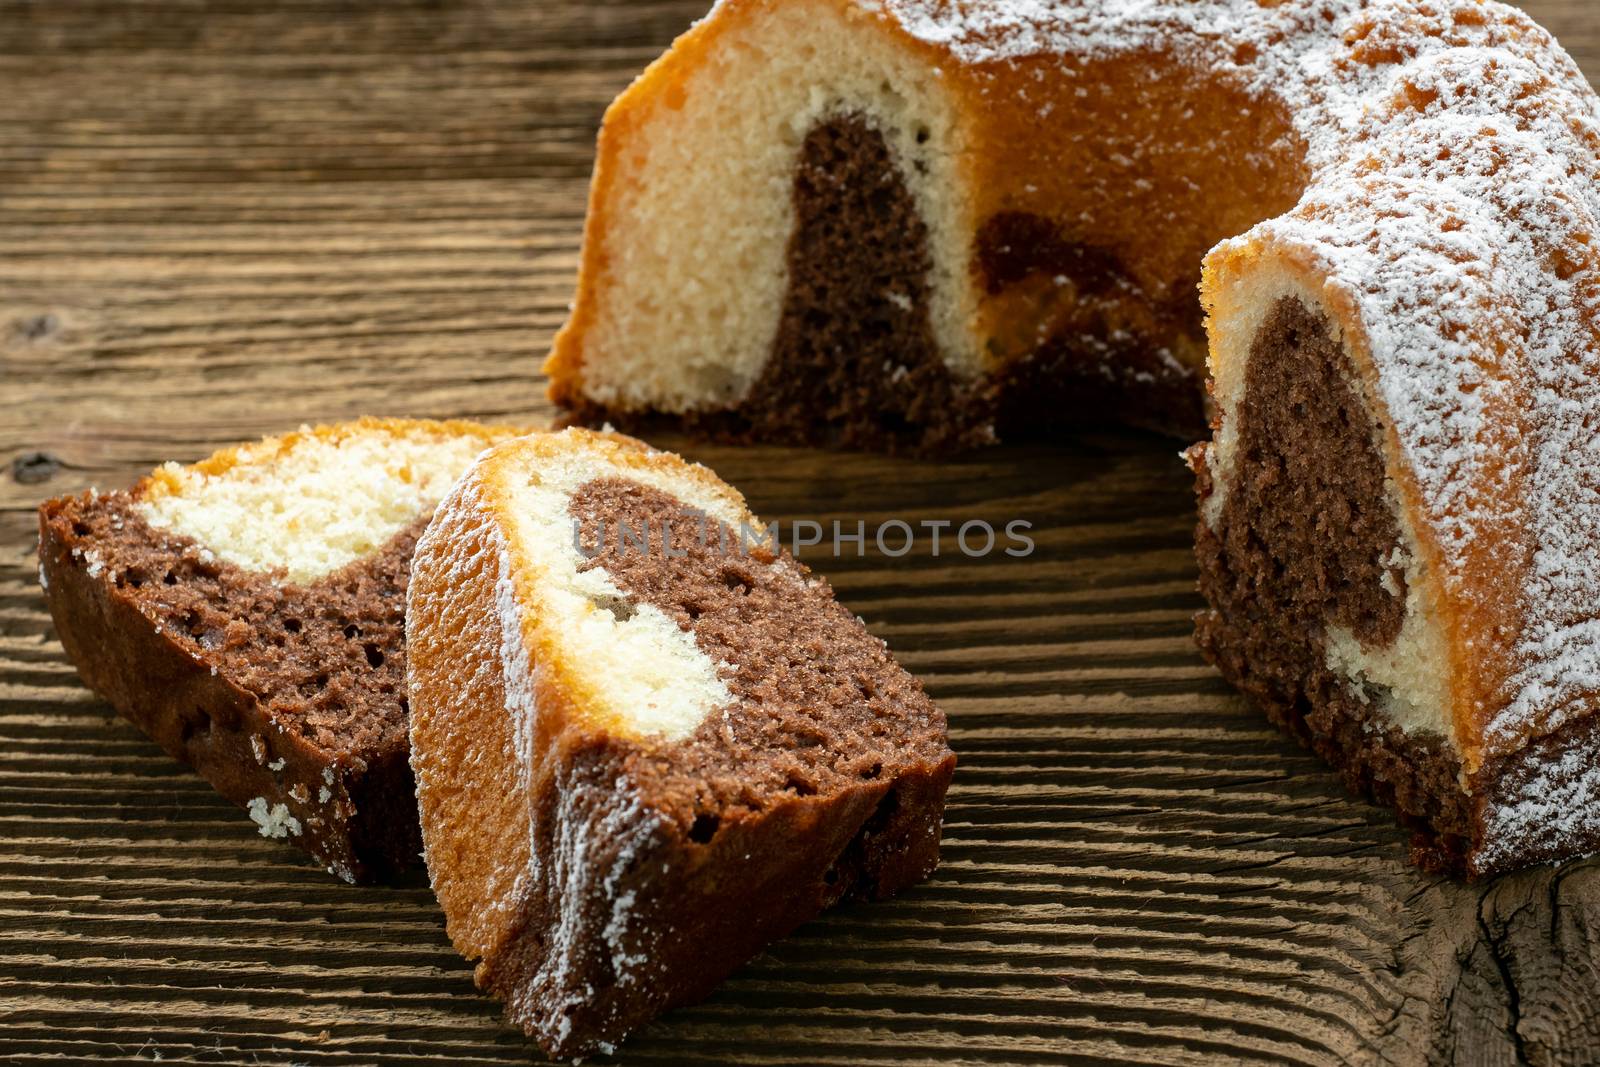 Traditional homemade marble cake. Sliced marble bundt cake on wo by xtrekx